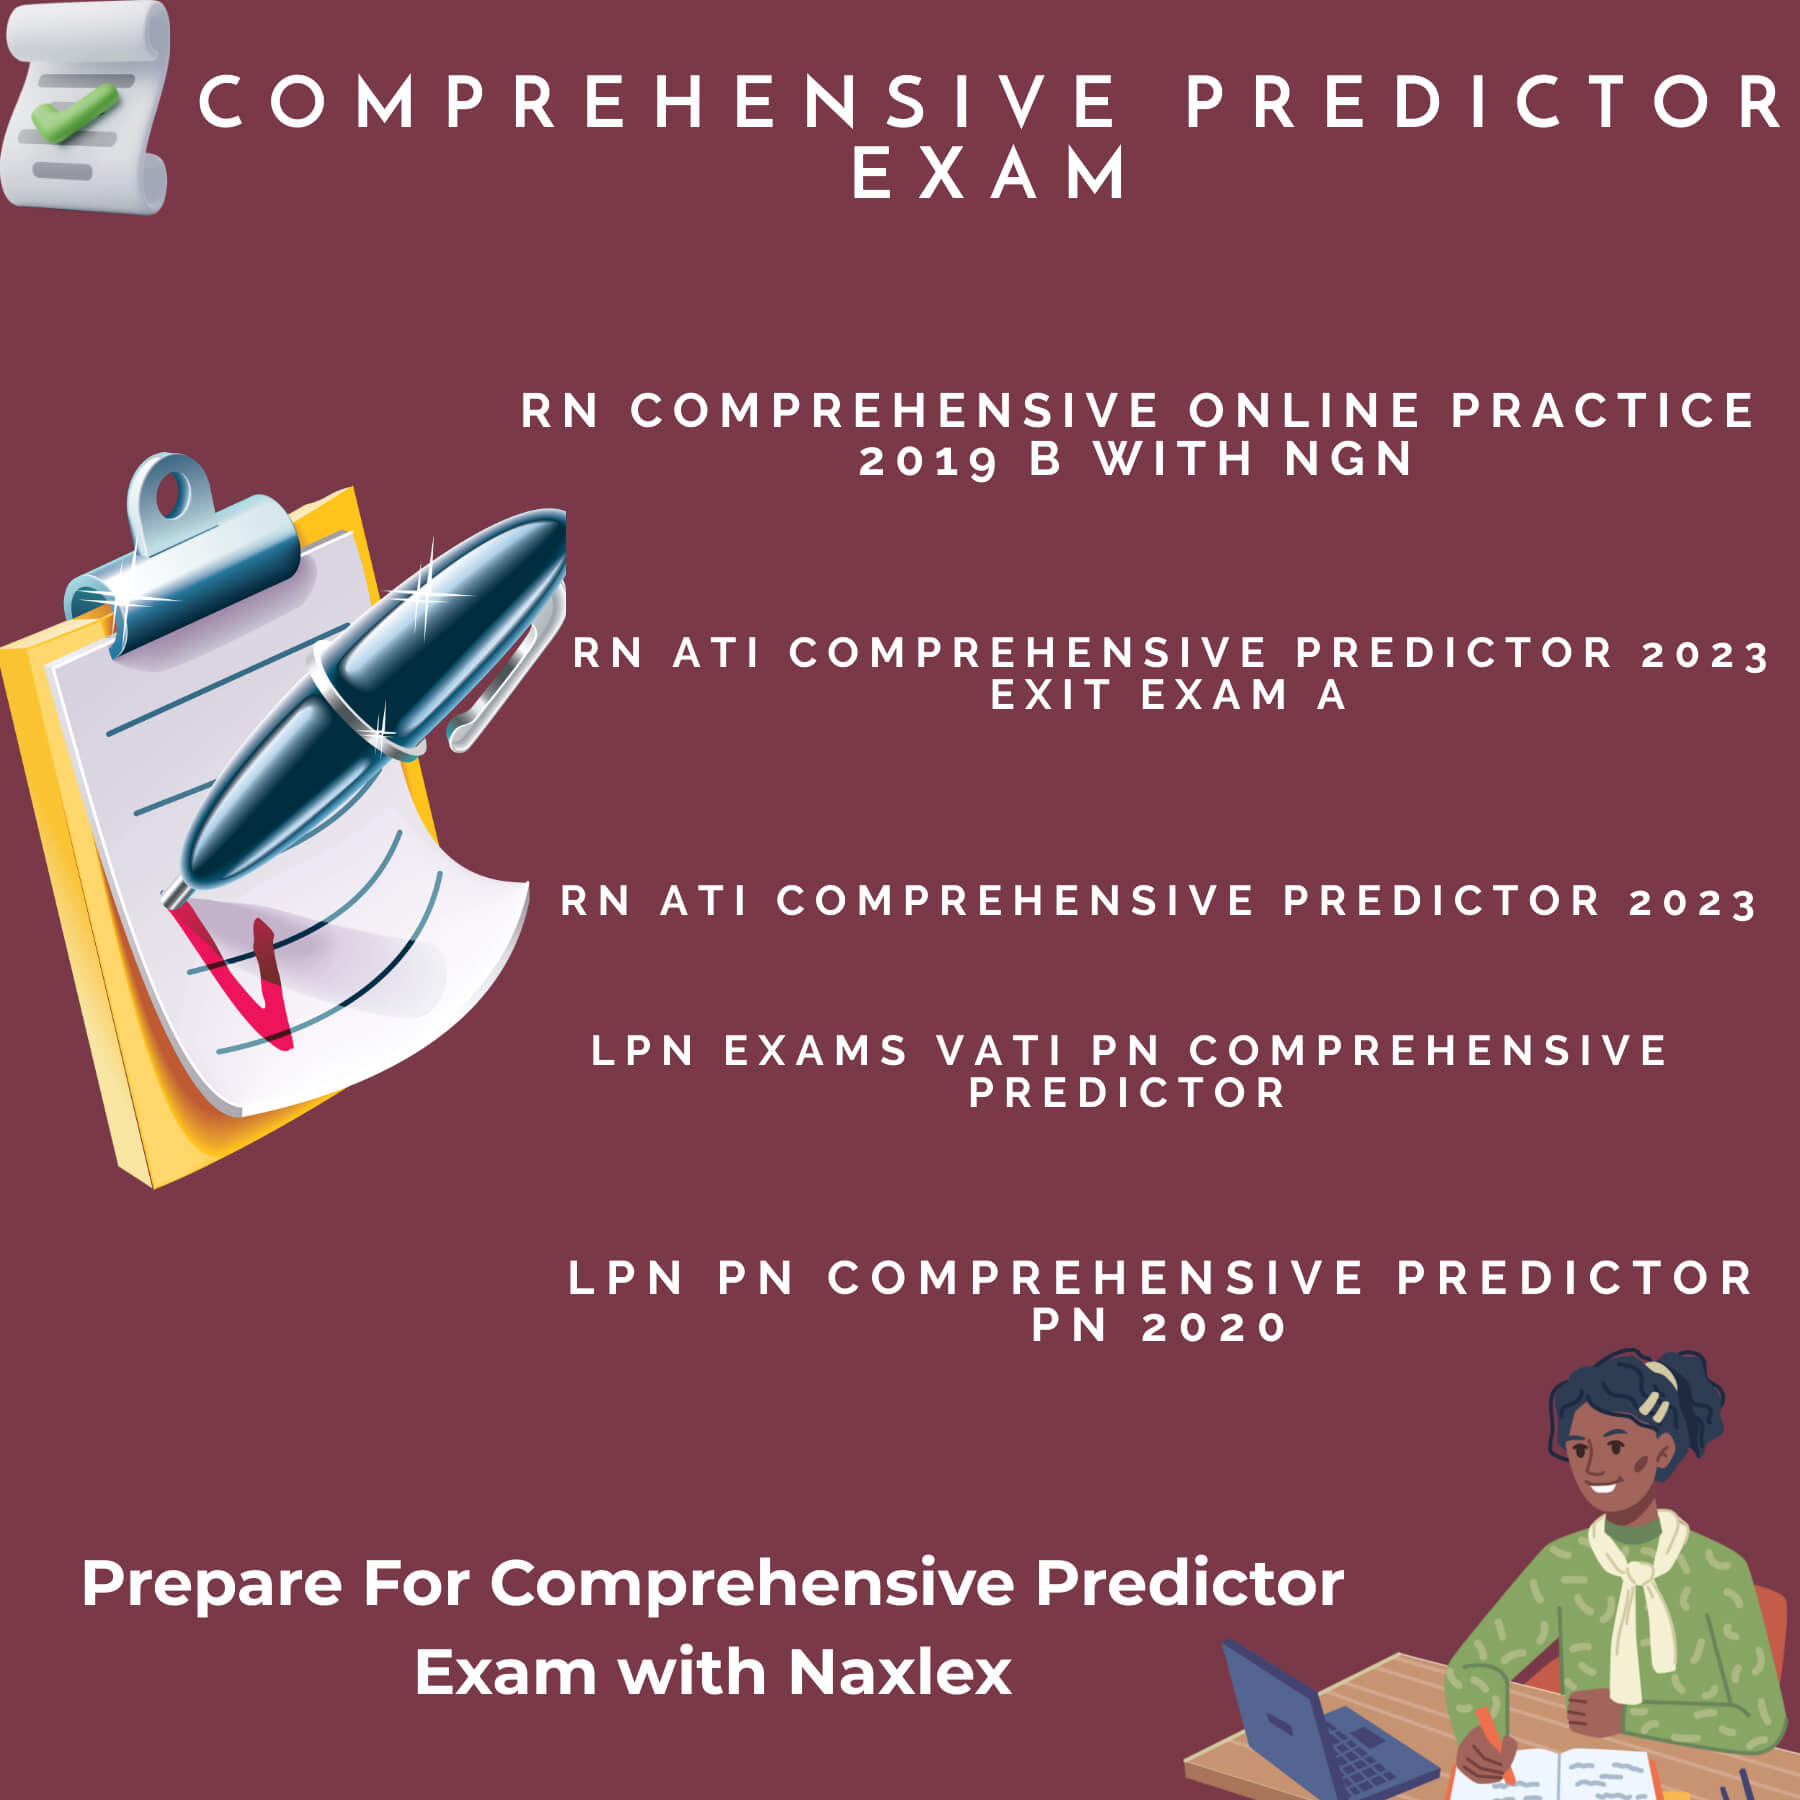 What is a Comprehensive Predictor Exam